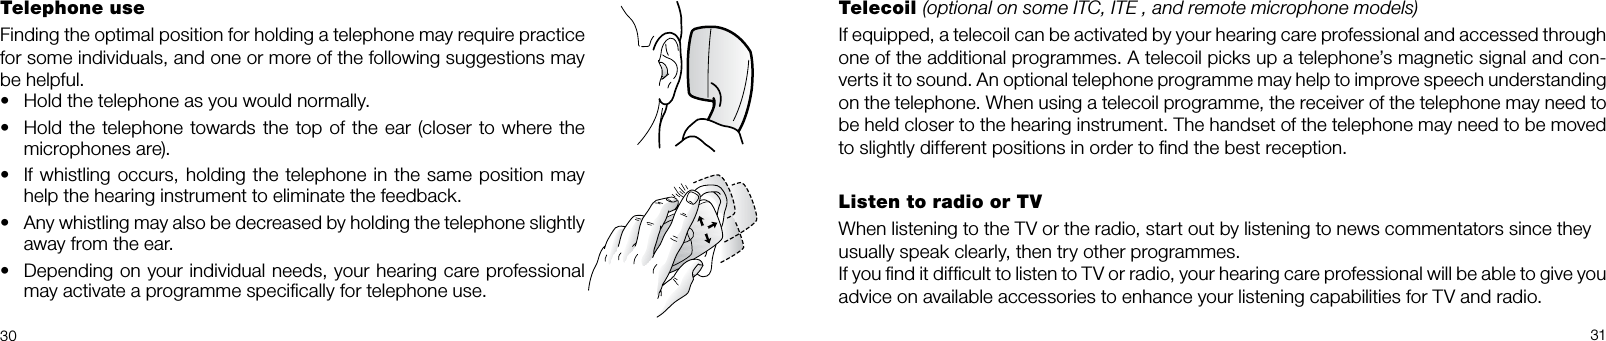 30 31Telephone useFinding the optimal position for holding a tele phone may require practice for some individuals, and one or more of the following suggestions may be helpful.• Hold the telephone as you would normally.• Hold the telephone towards the top of the ear (closer to where the microphones are).• If whistling occurs, holding the tele phone in the same position may help the hearing instrument to eliminate the feedback.• Any whistling may also be decreased by holding the telephone slightly away from the ear.• Depending on your individual needs, your hearing care professional  may activate a programme speciﬁcally for telephone use.Telecoil (optional on some ITC, ITE , and remote microphone models)If equipped, a telecoil can be activated by your hearing care professional and accessed through one of the additional programmes. A telecoil picks up a telephone’s magnetic signal and con-verts it to sound. An optional telephone programme may help to improve speech understanding on the telephone. When using a telecoil programme, the receiver of the telephone may need to be held closer to the hearing instrument. The handset of the telephone may need to be moved to slightly different positions in order to ﬁnd the best reception. Listen to radio or TVWhen listening to the TV or the radio, start out by listening to news commentators since theyusually speak clearly, then try other programmes.If you ﬁnd it difﬁcult to listen to TV or radio, your hearing care professional will be able to give you advice on available accessories to enhance your listening capabilities for TV and radio.